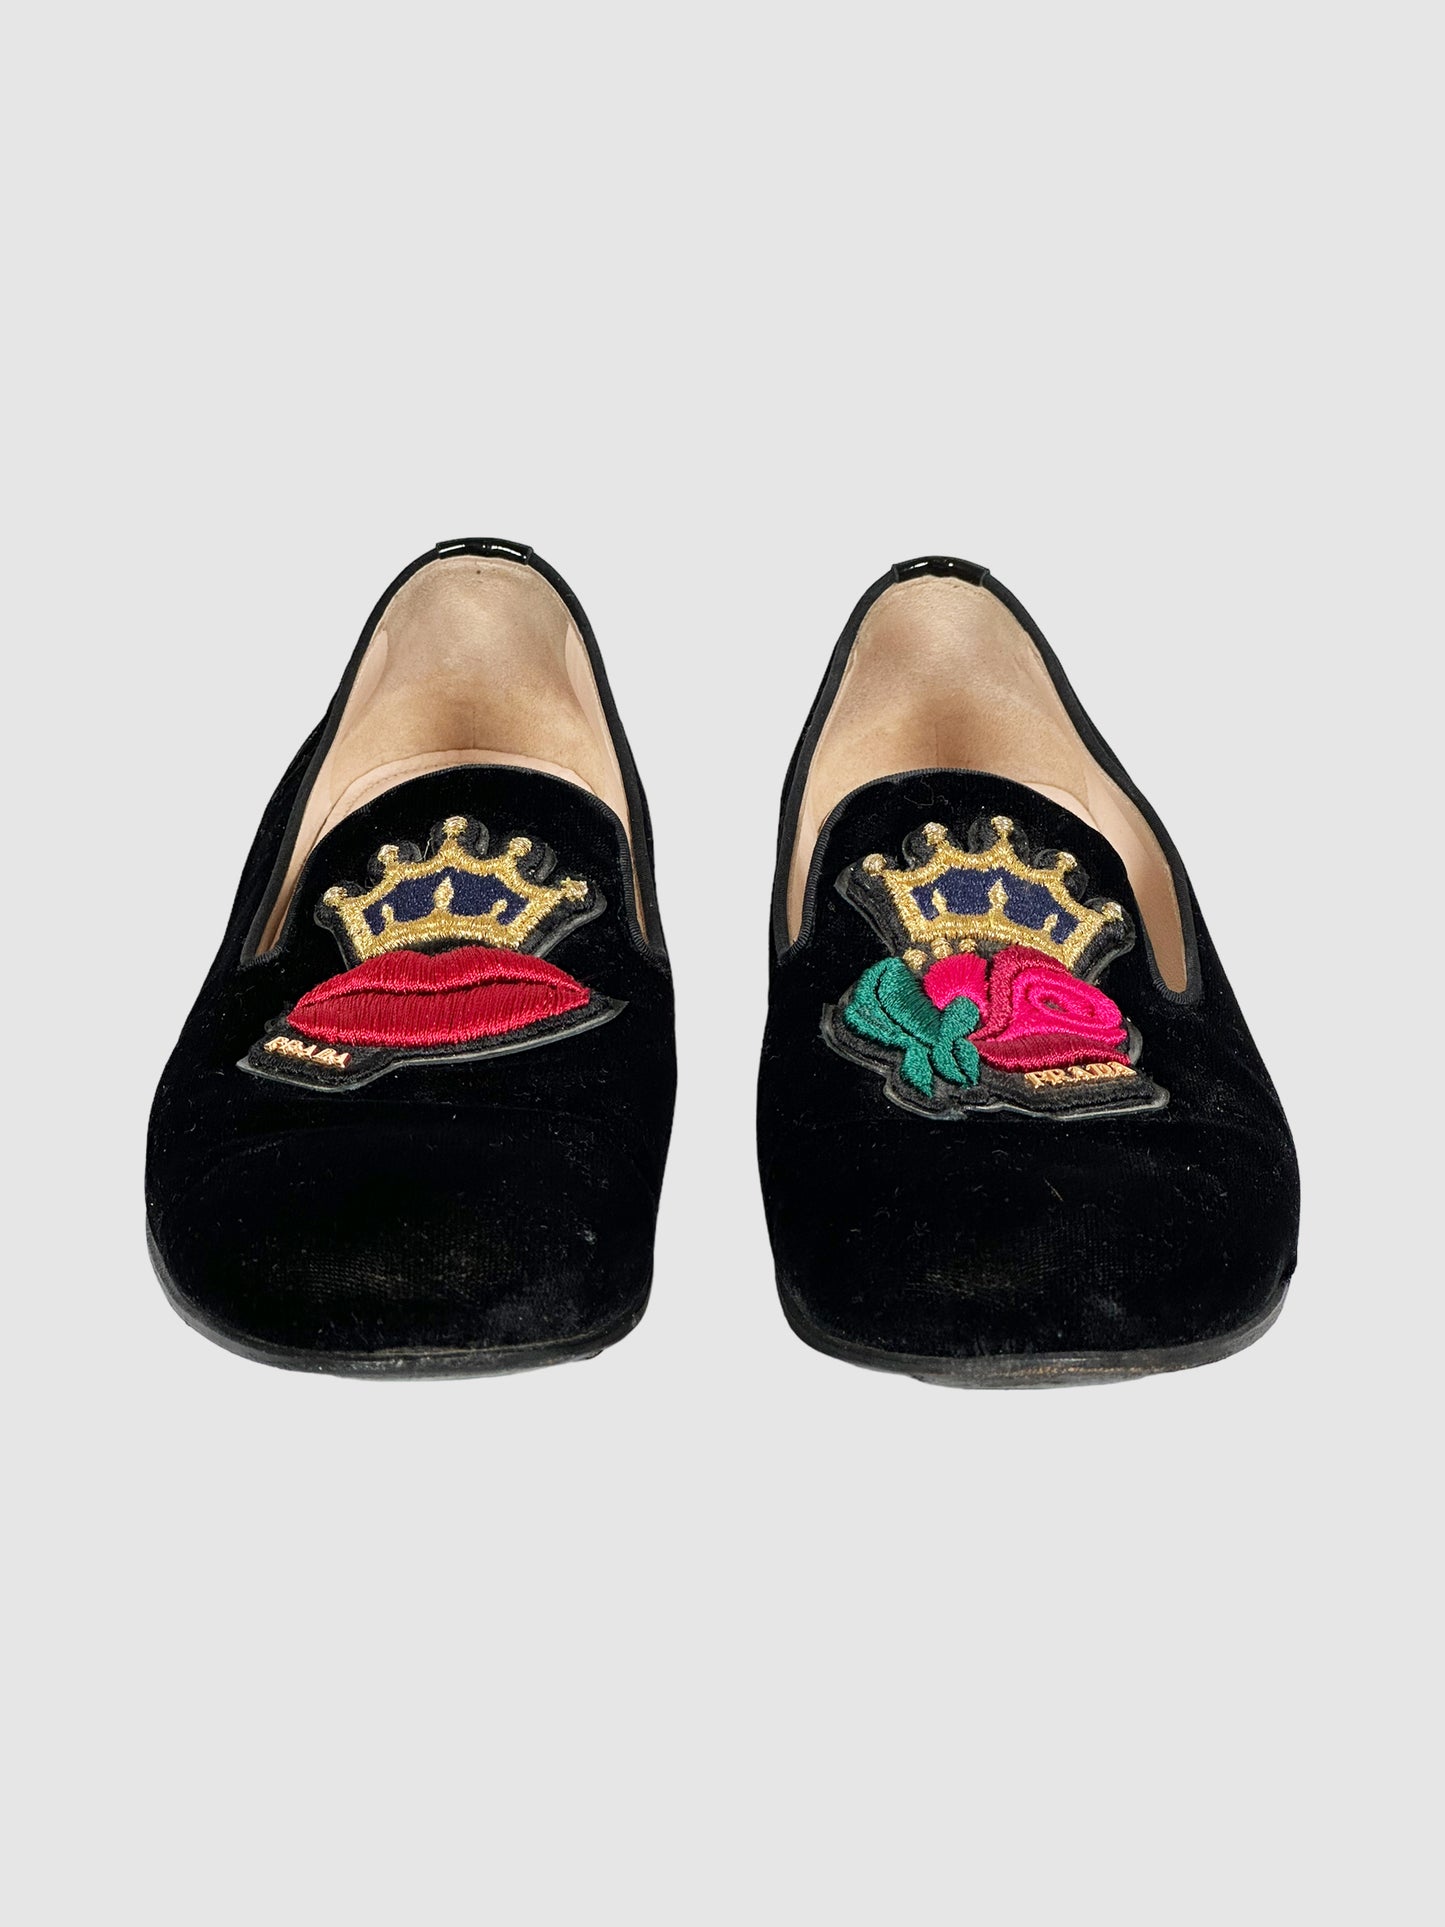 Velvet Embroidered Loafers - Size 40